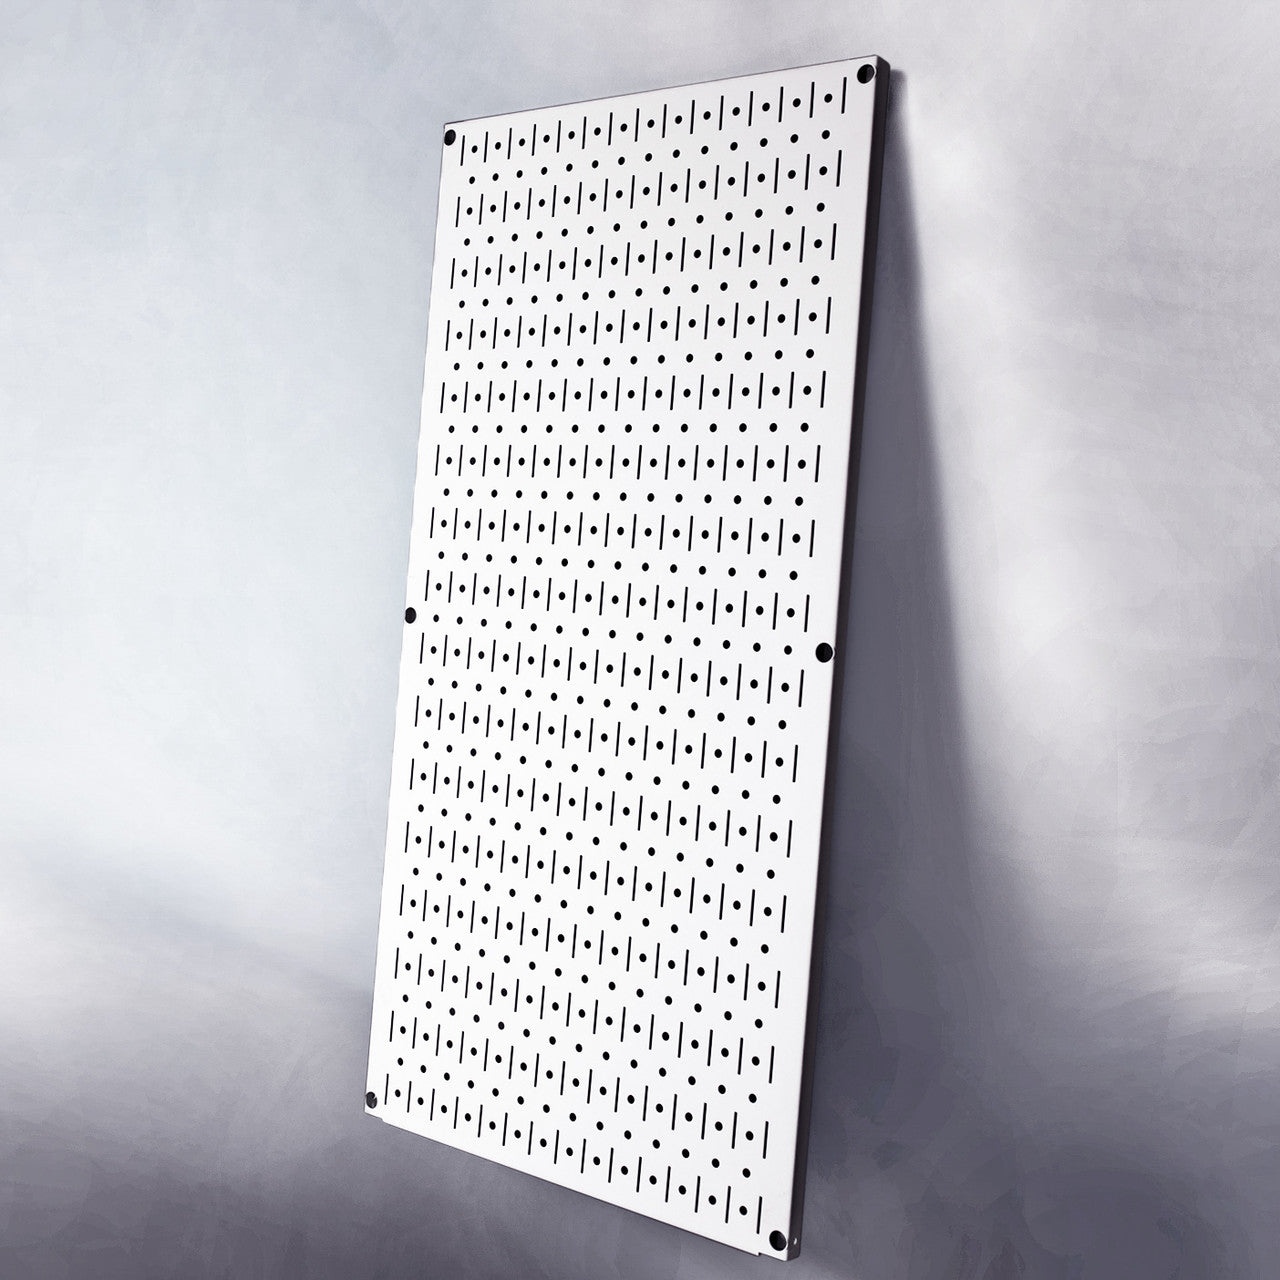 Signature Series Ghost White Textured Matte Metal Pegboard Panel